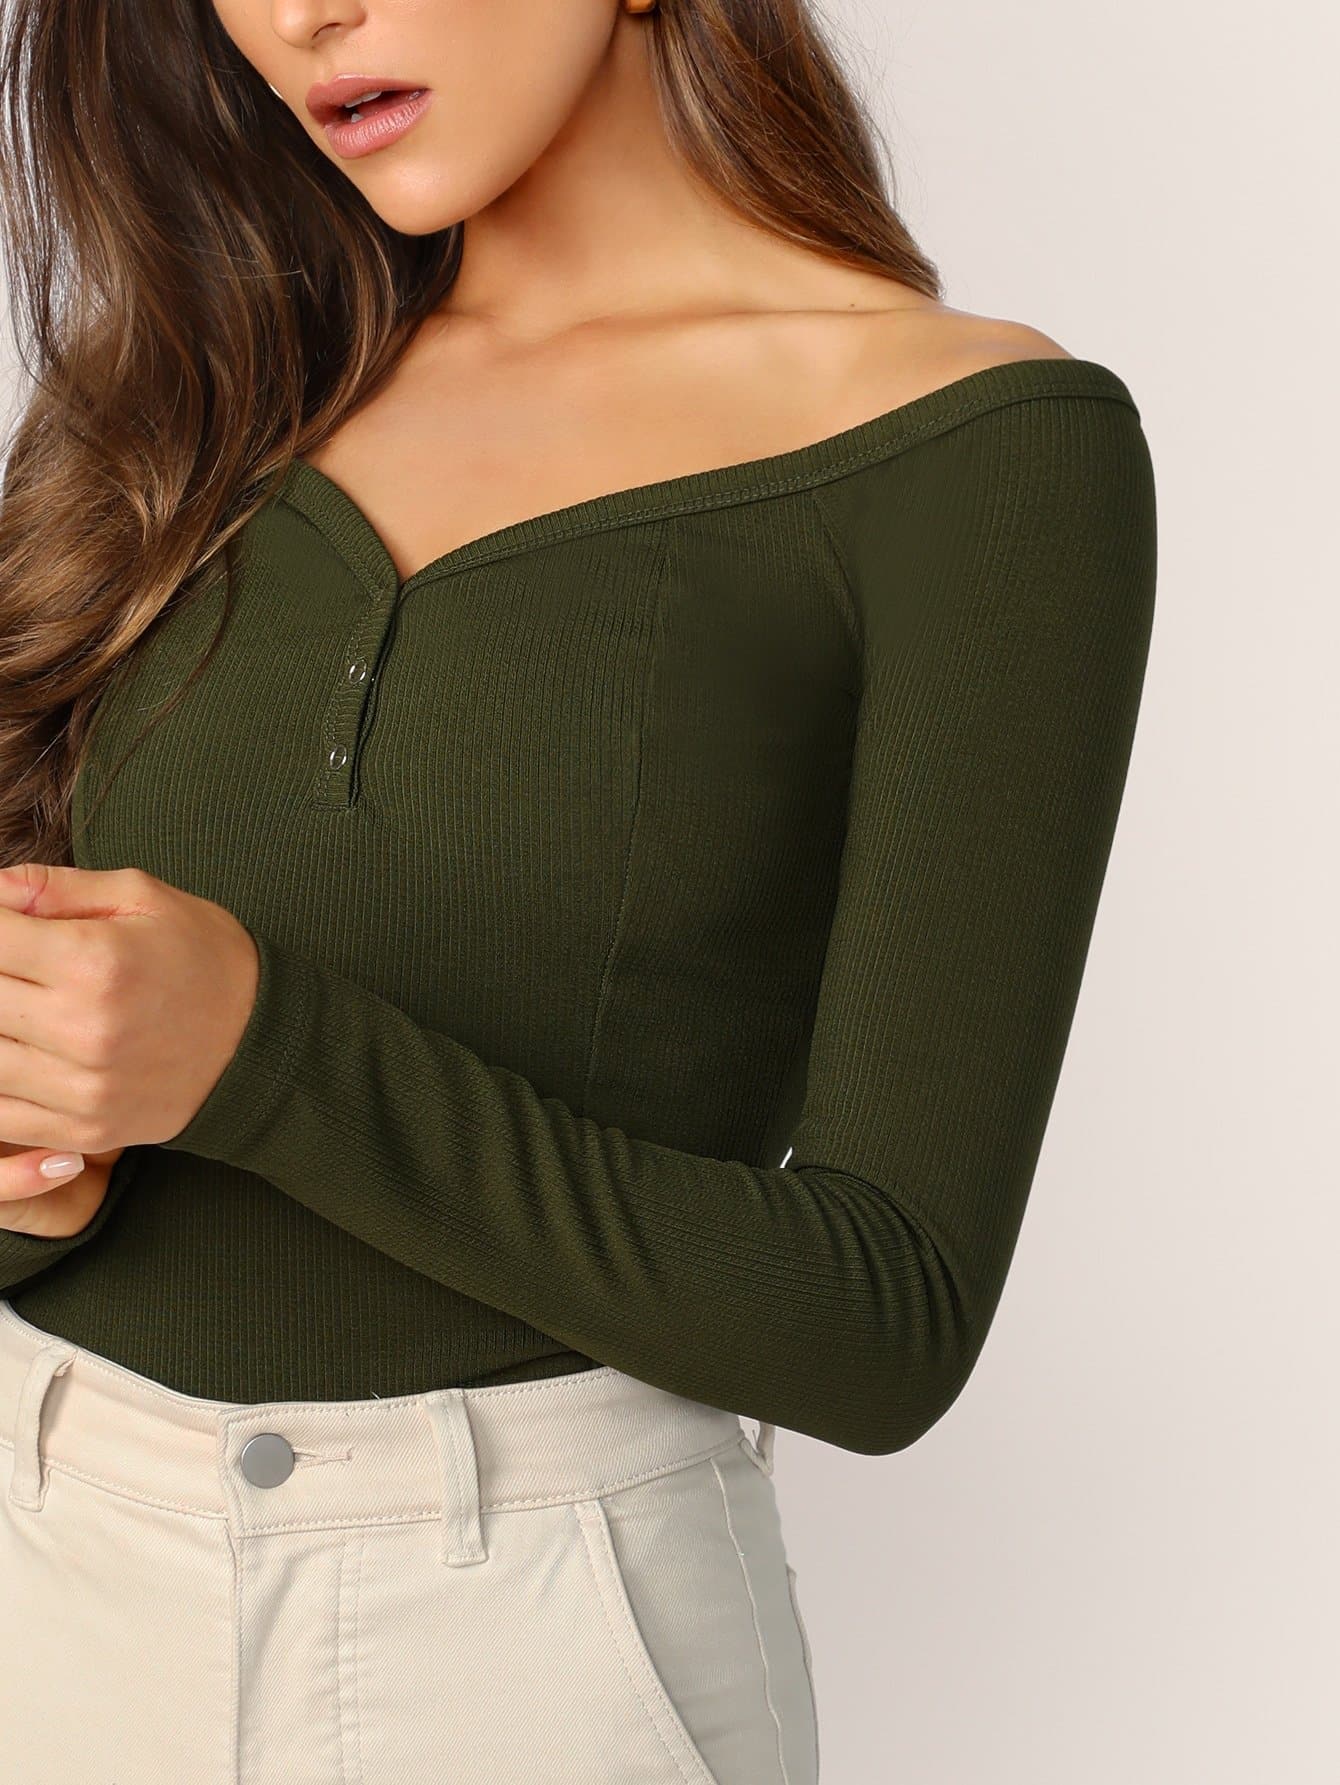 Off Shoulder Press Buttoned Front Rib-knit Bardot Tee Top